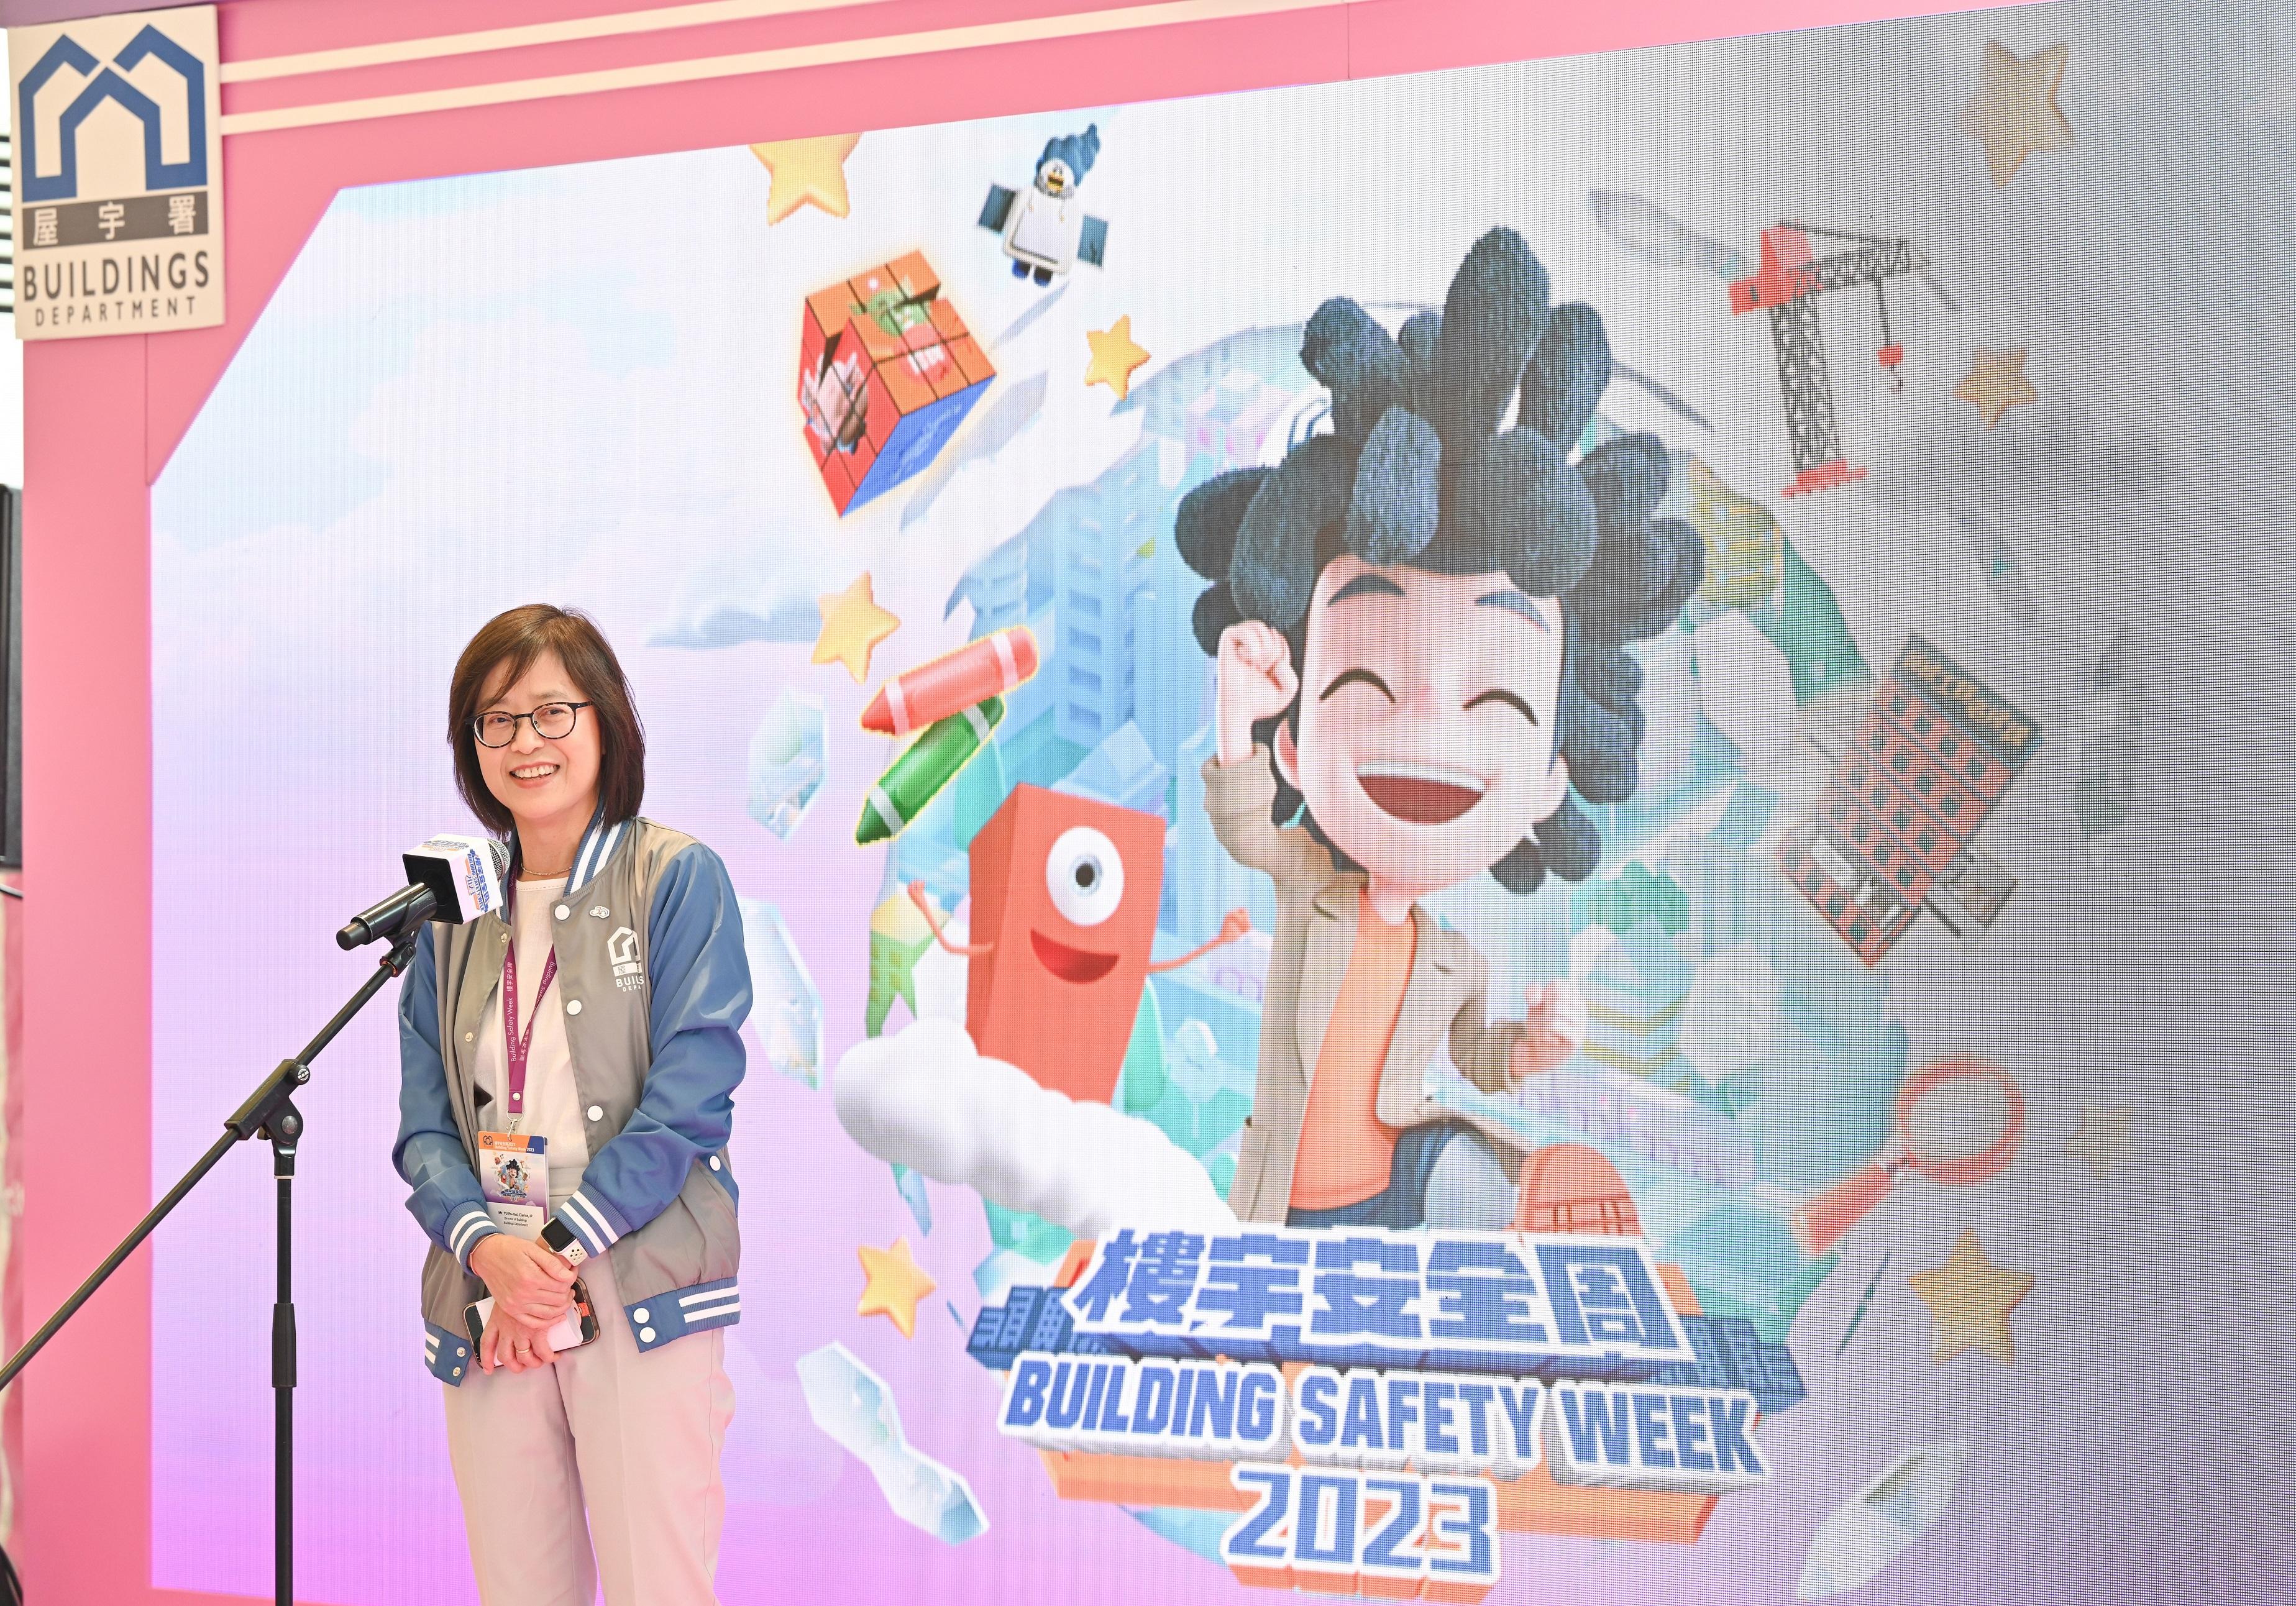 The Buildings Department launched Building Safety Week 2023 today (October 21). Picture shows the Director of Buildings, Ms Clarice Yu, speaks at the opening ceremony of Building Safety Week 2023.